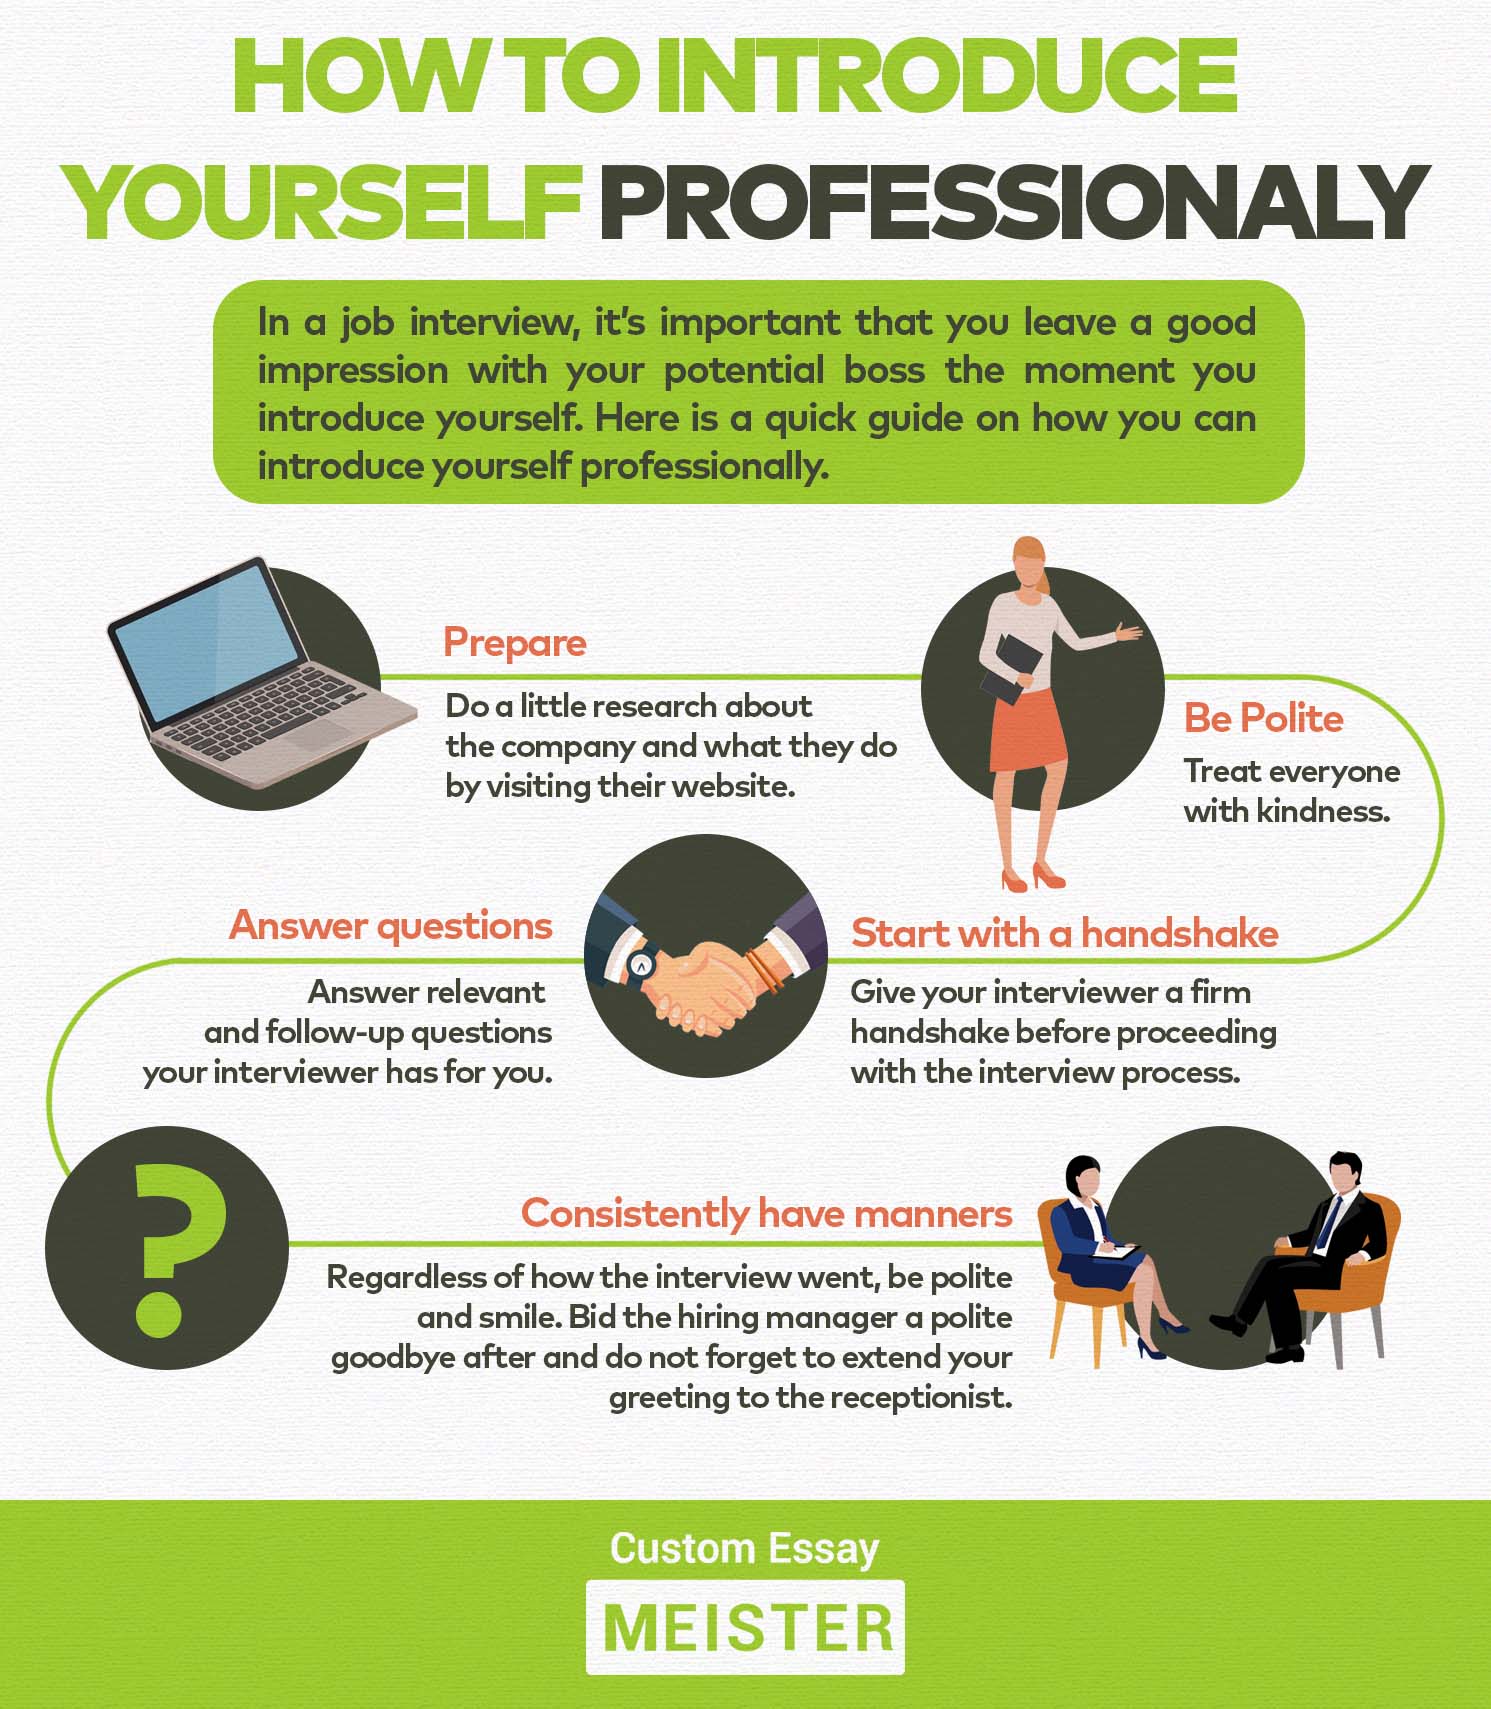 how to introduce yourself professionally in an essay